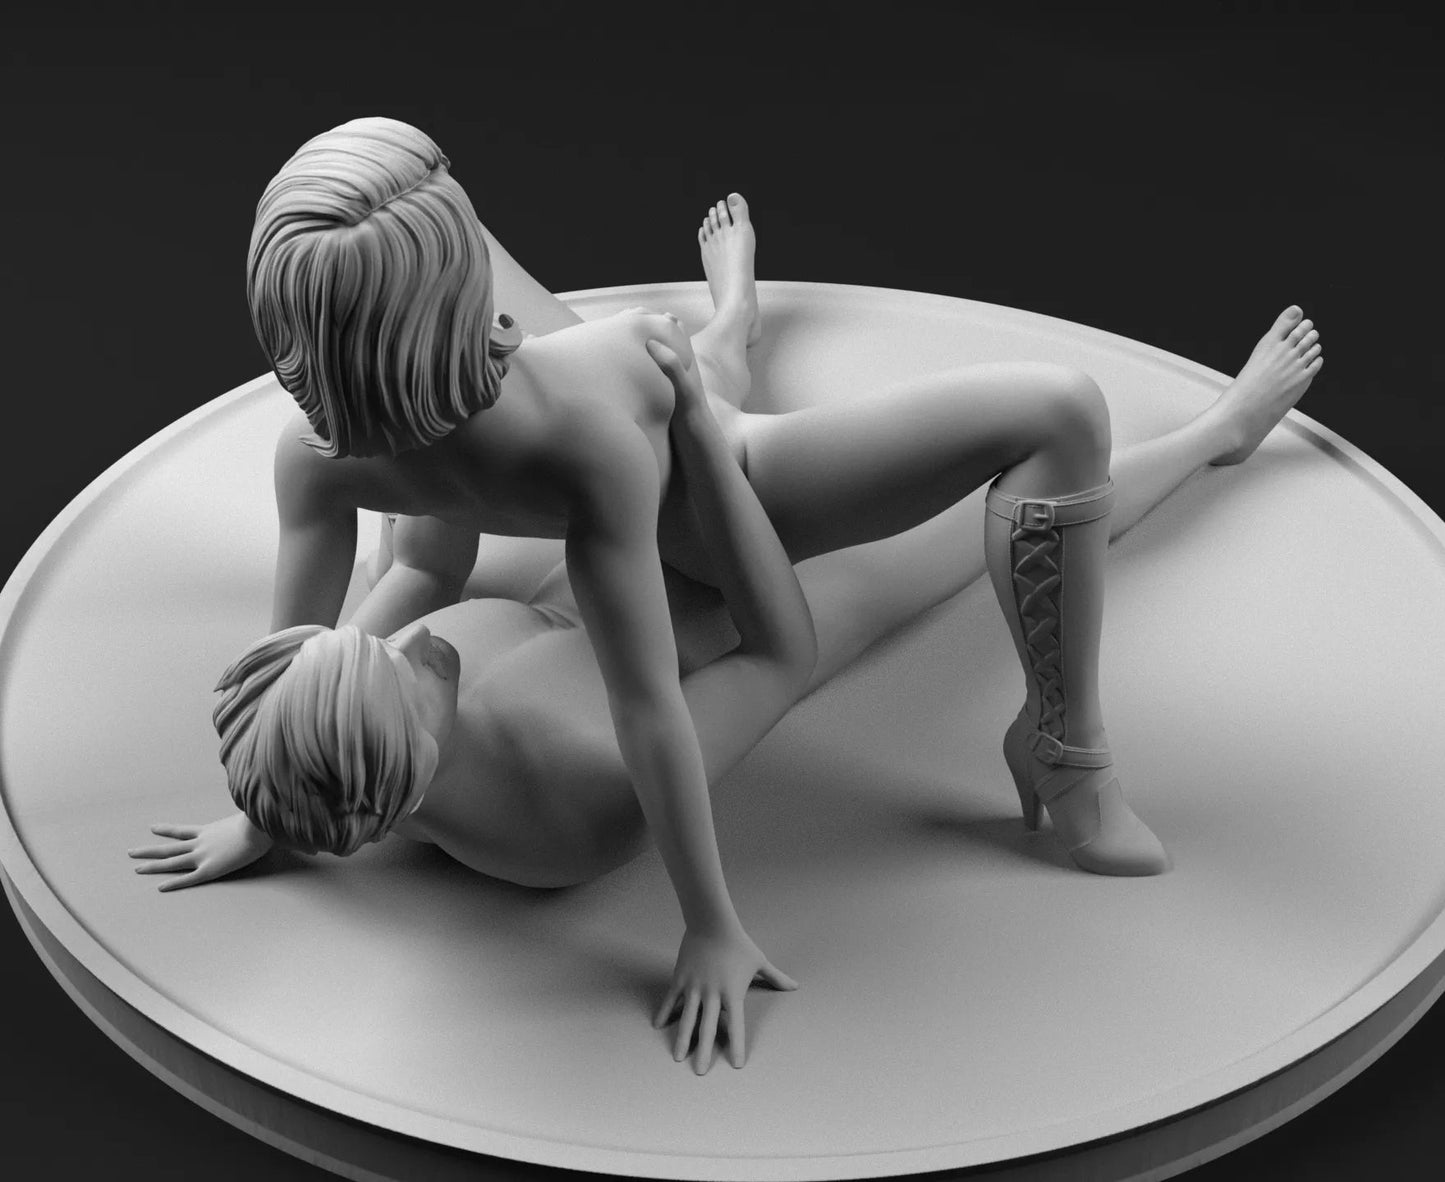 NSFW Resin Miniature Man with Maid